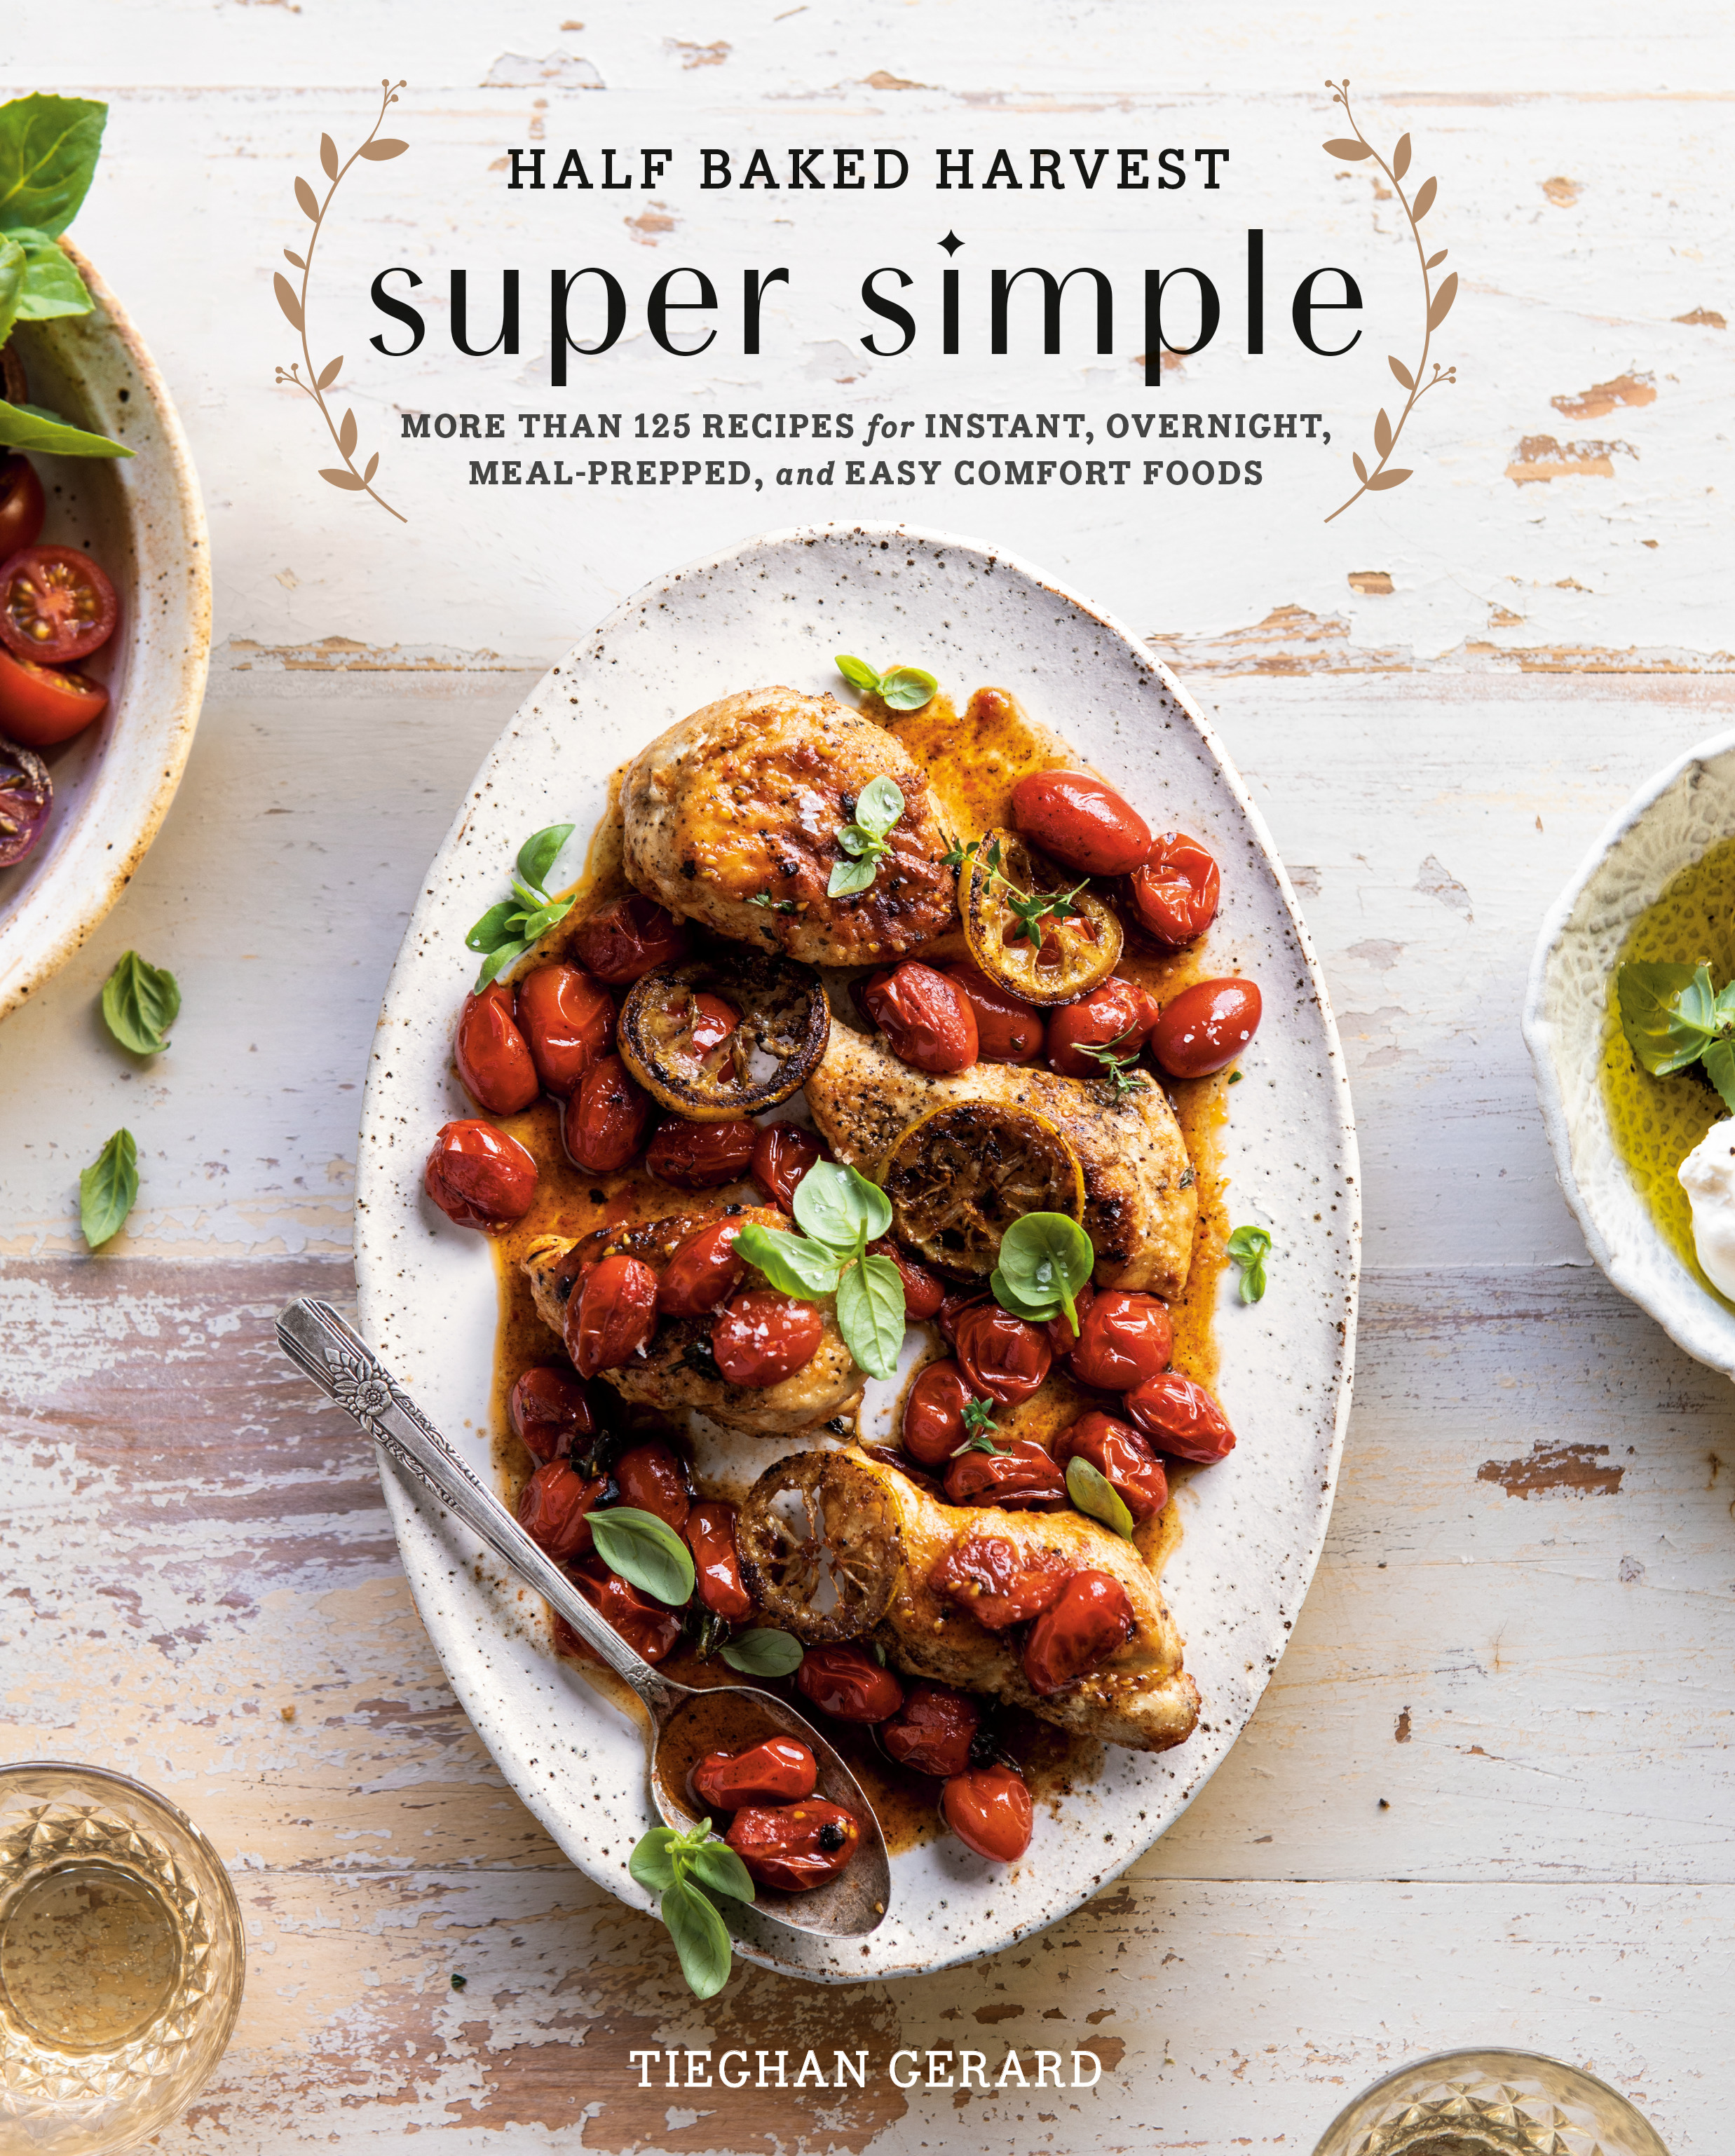 Half Baked Harvest Super Simple : More Than 125 Recipes for Instant, Overnight, Meal-Prepped, and Easy Comfort Foods: A Cookbook | Gerard, Tieghan